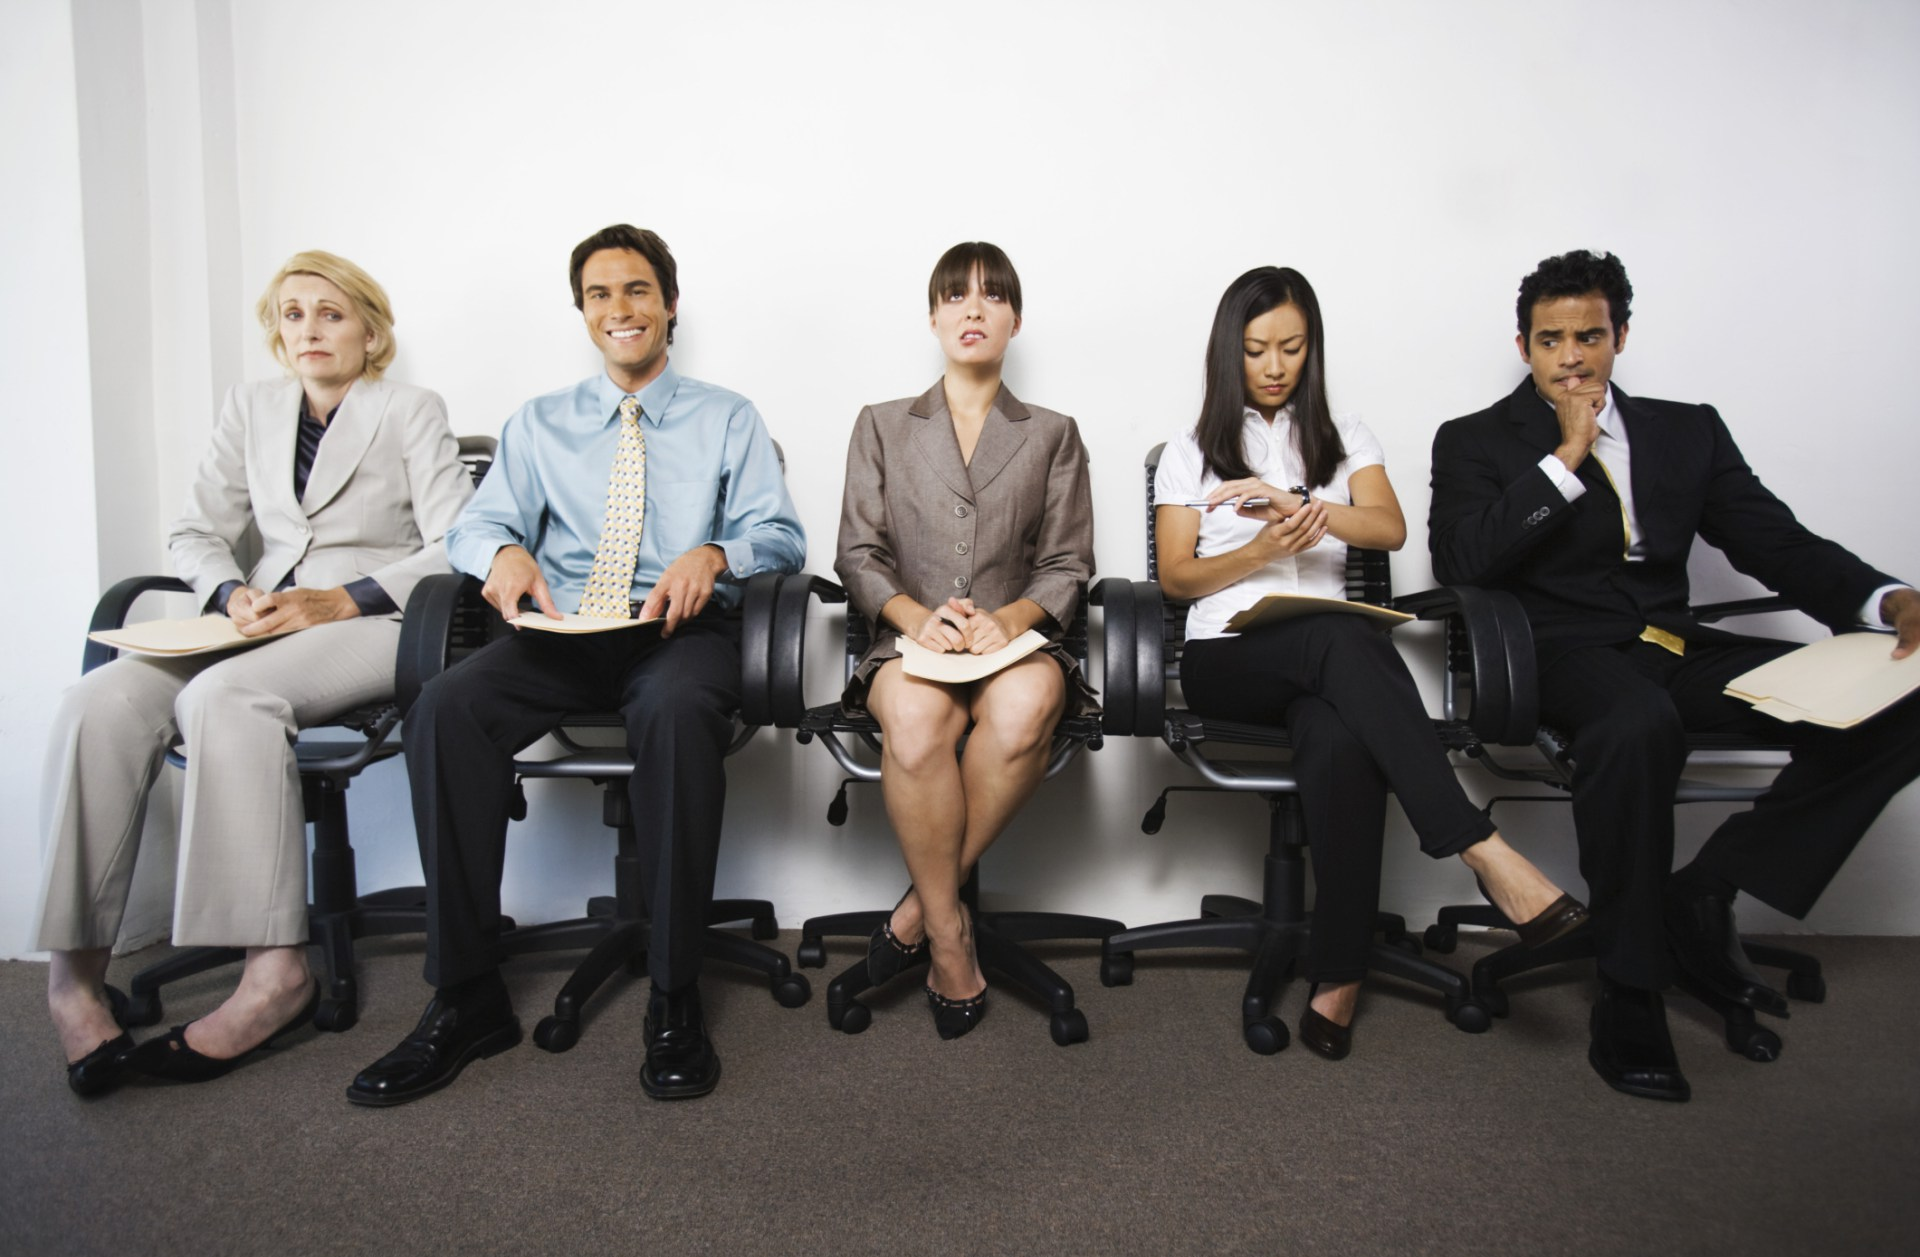 Job hoppers - What do employers & recruiters think